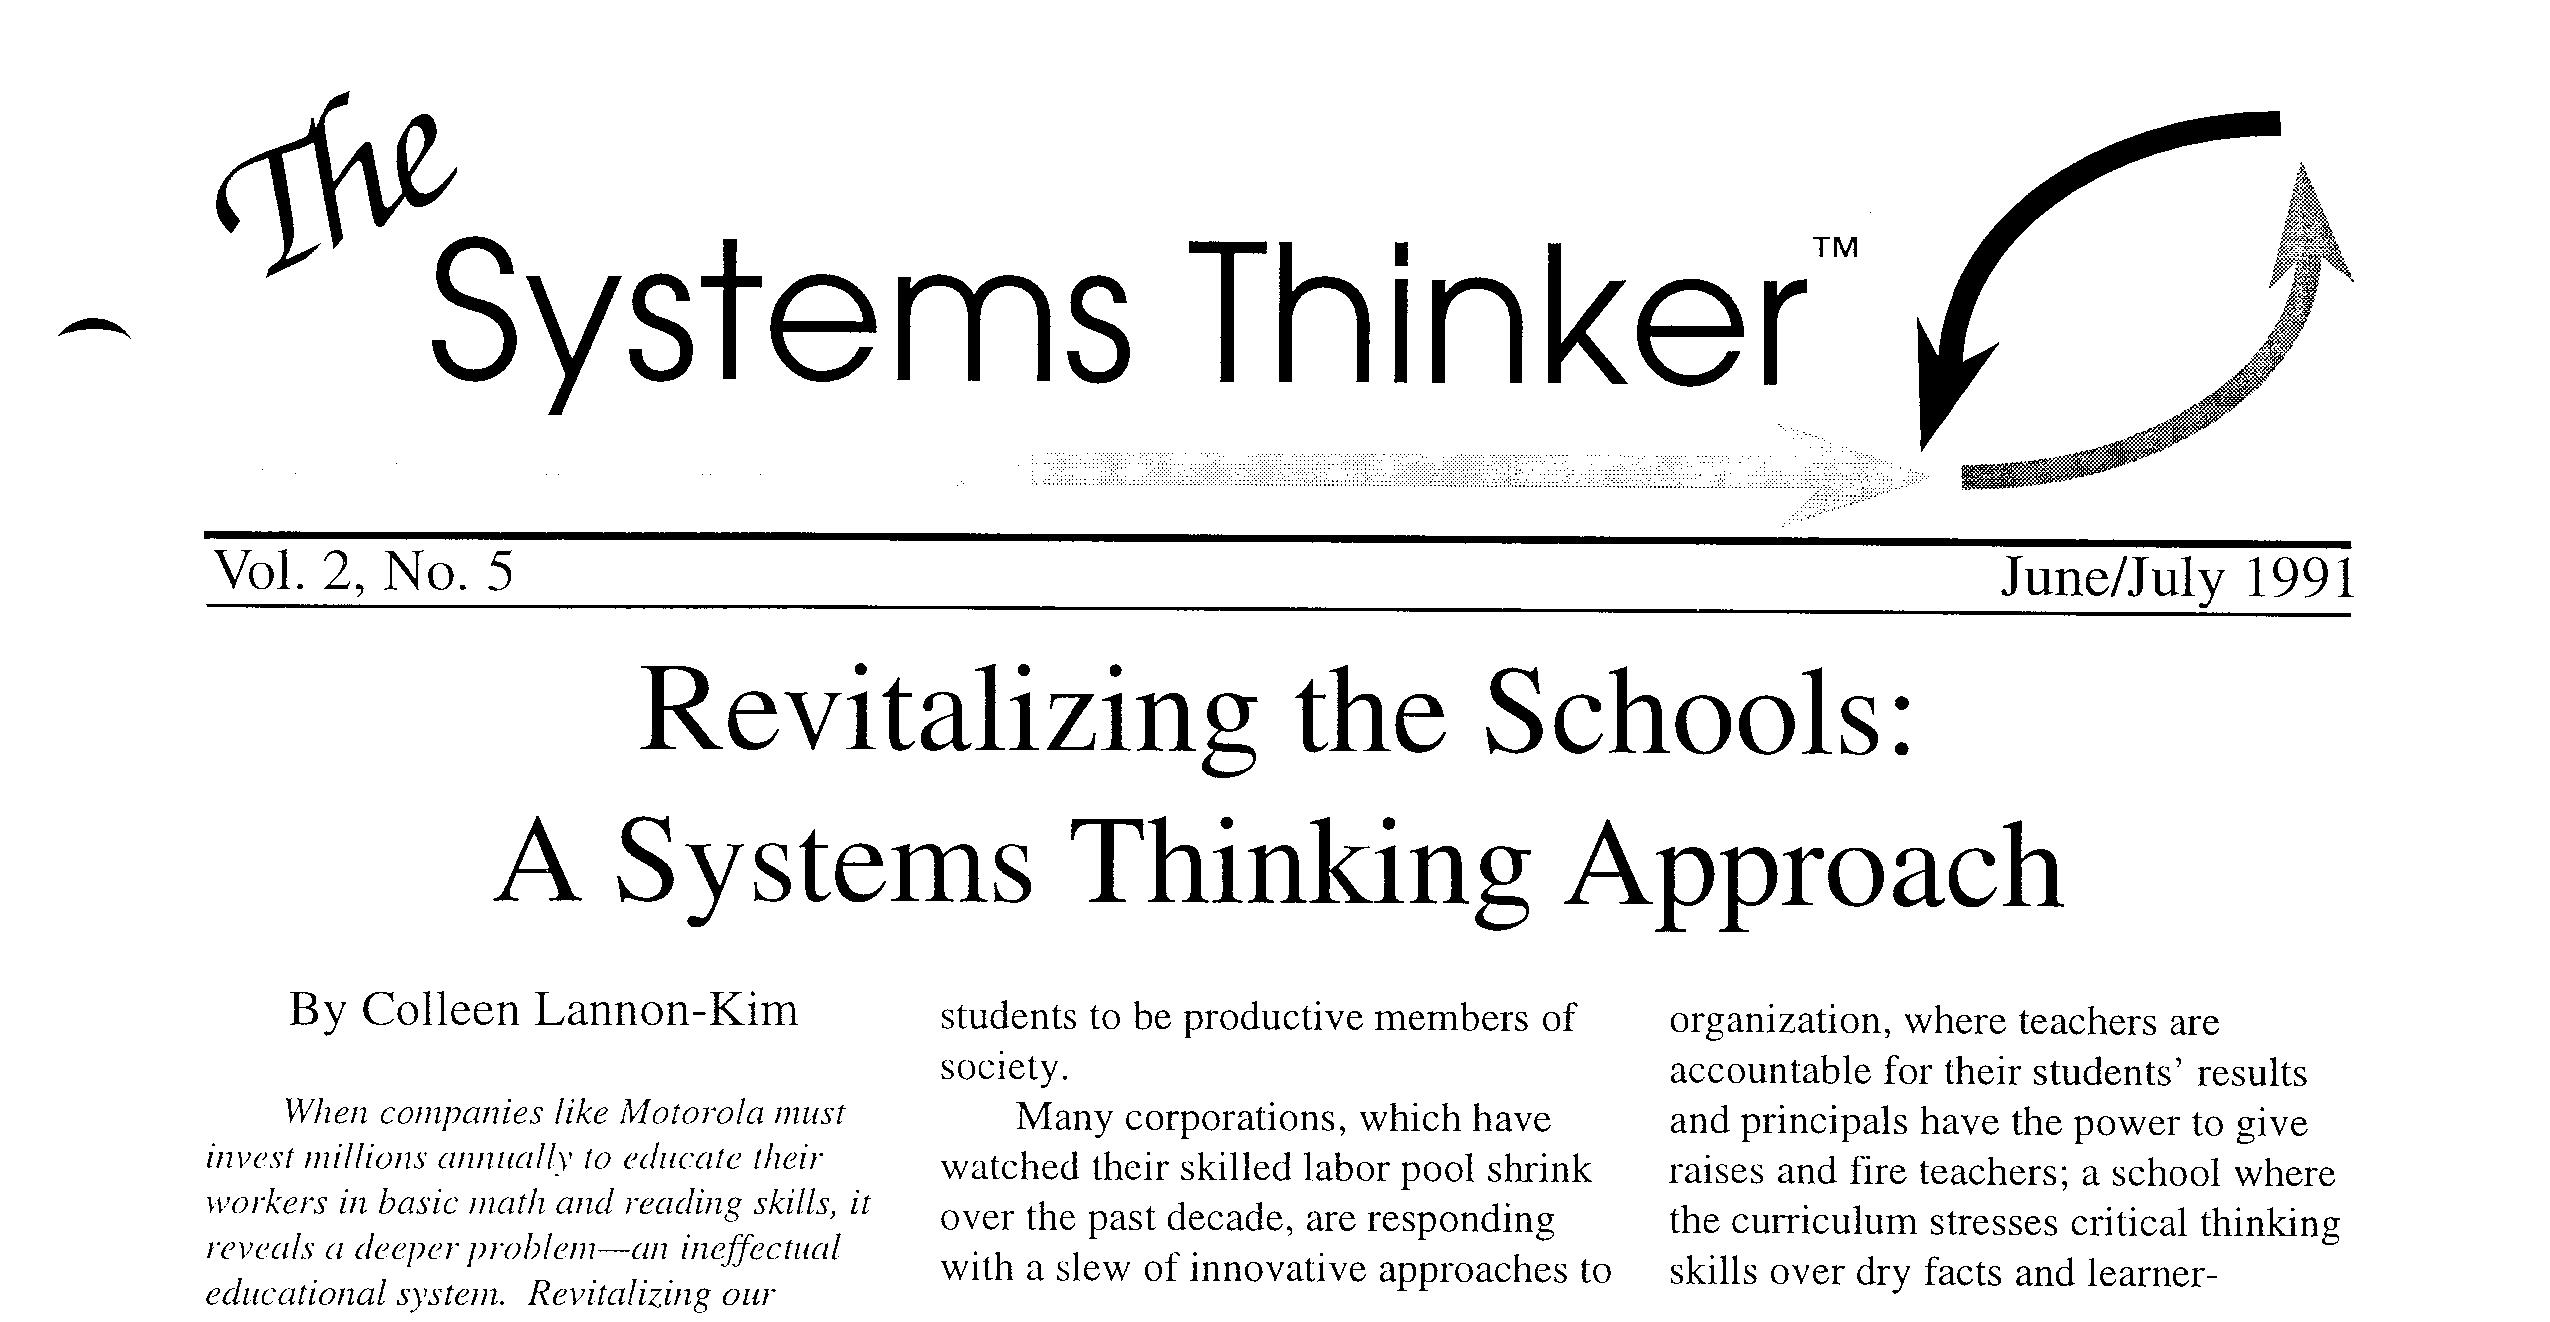 advantages of systems thinking